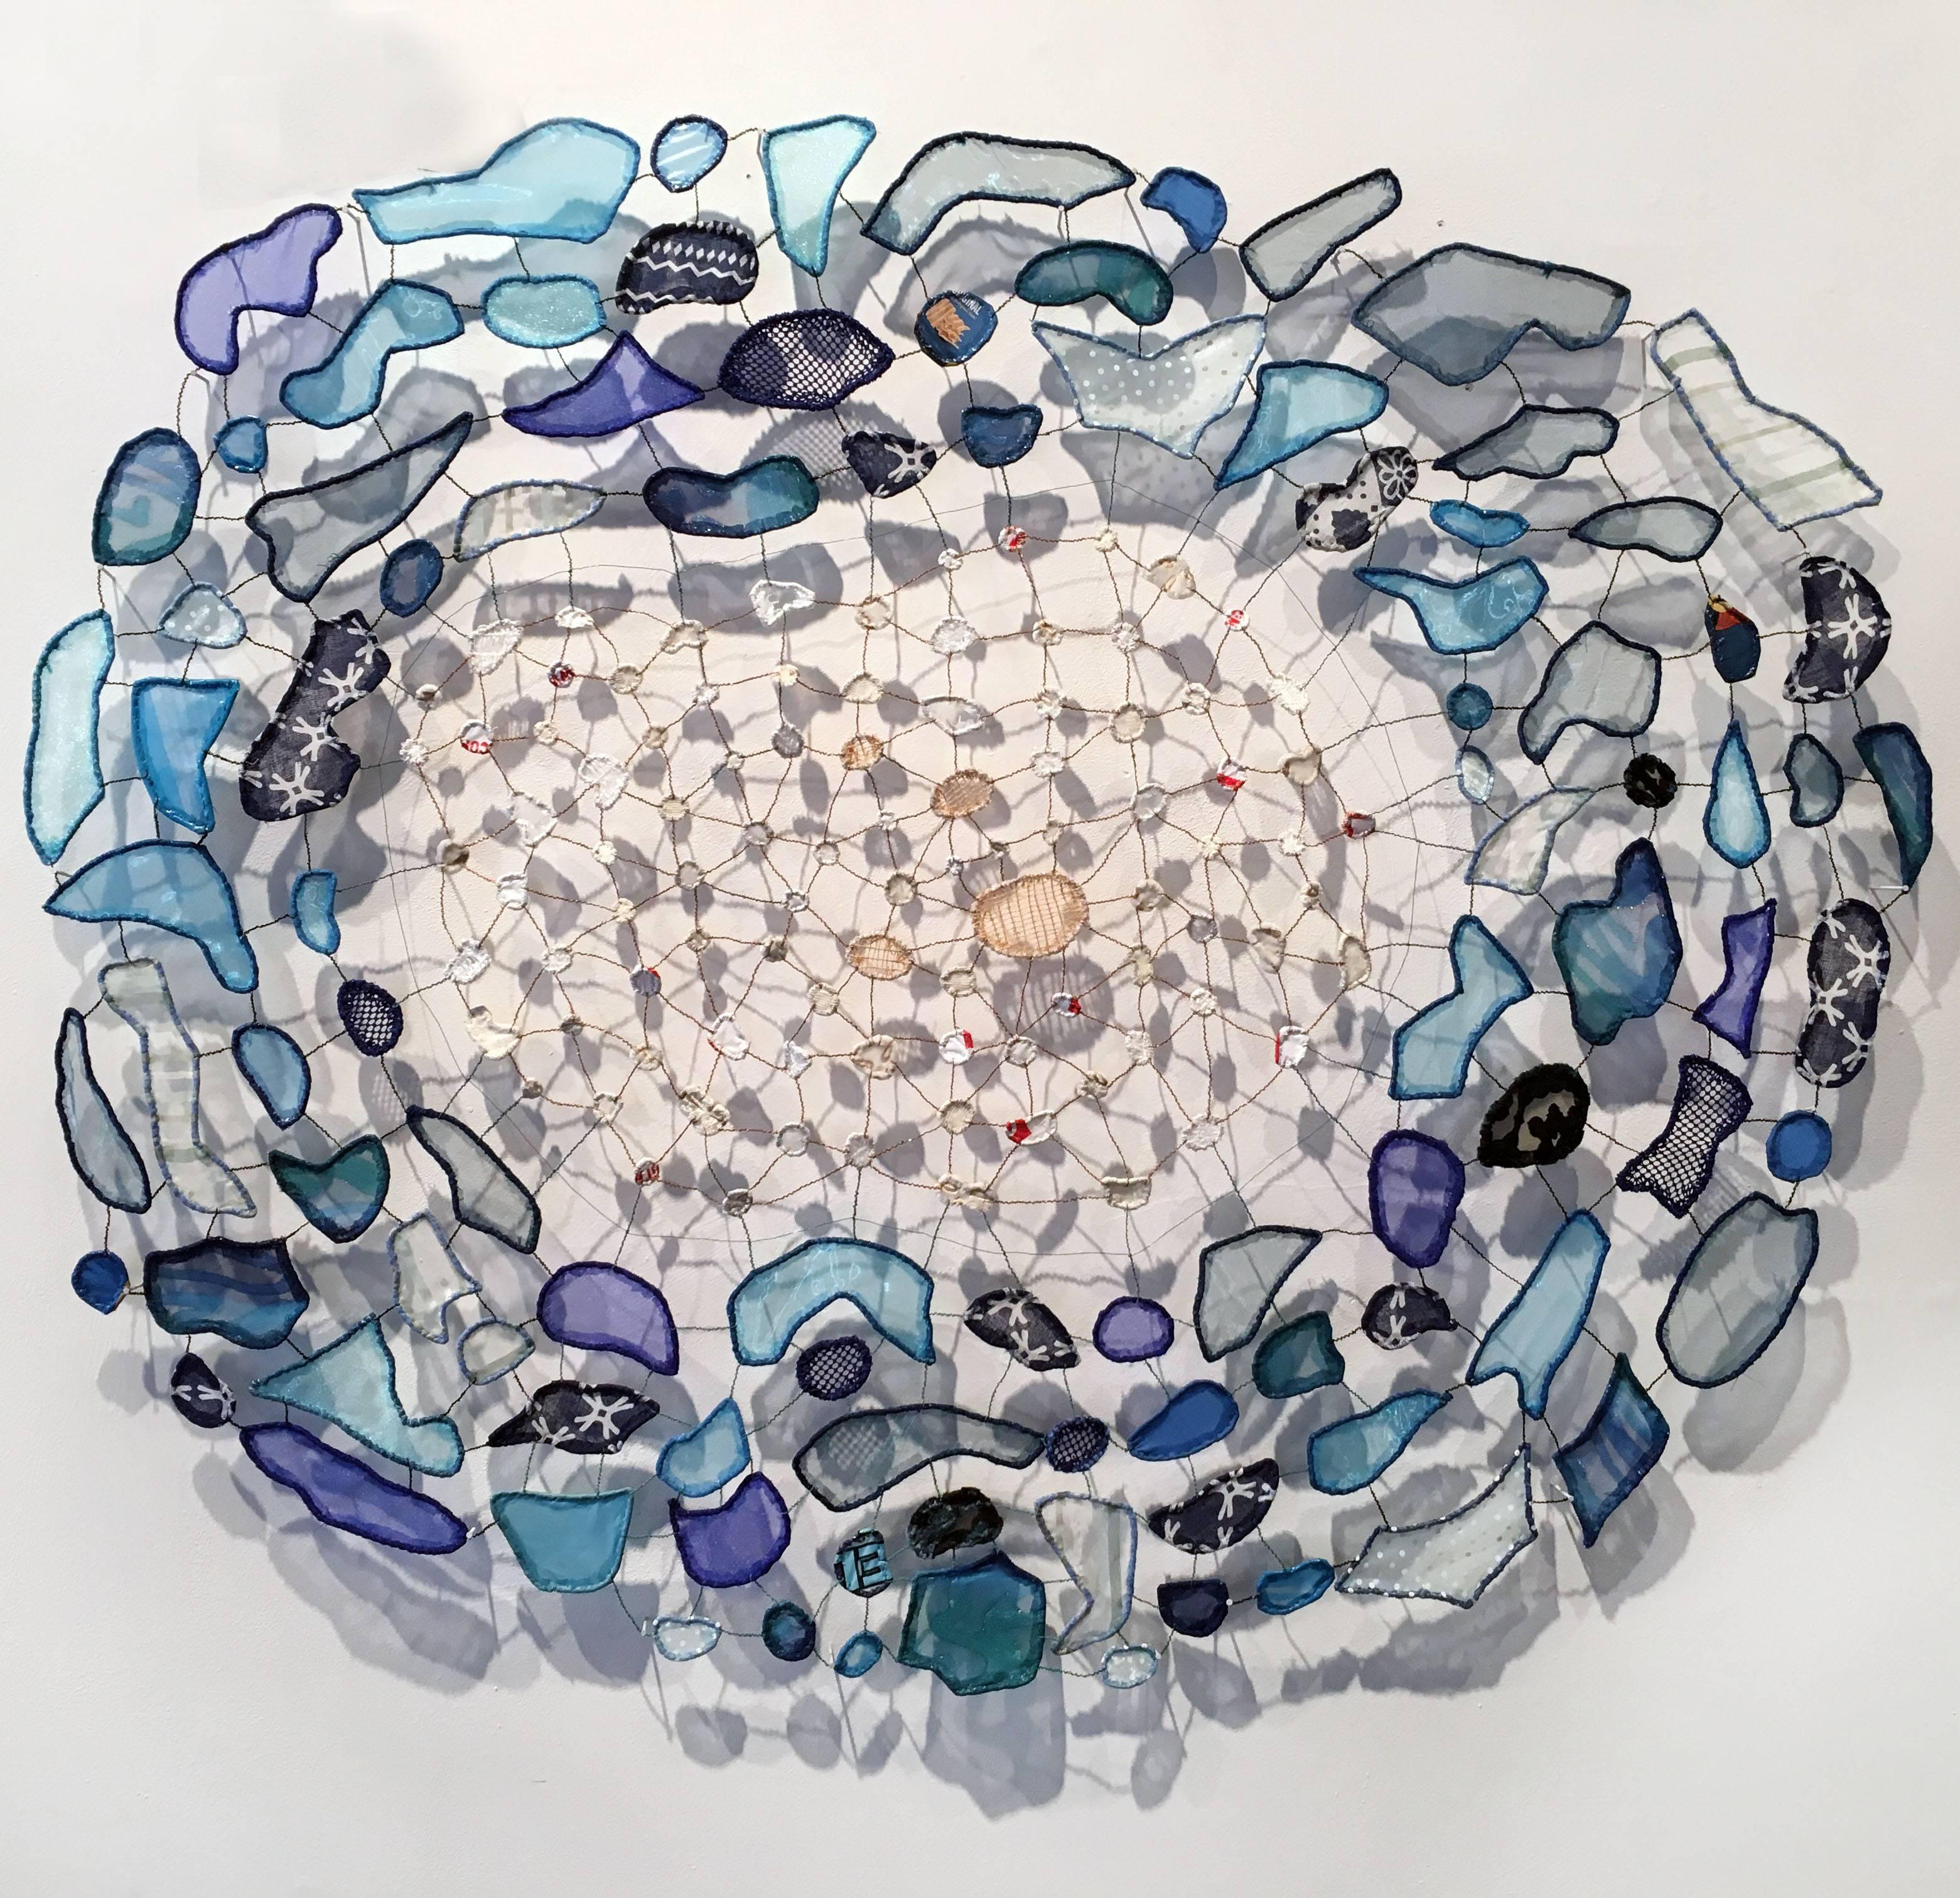 Caroline Lathan-Stiefel Abstract Sculpture - Untitled (Blue Cell)